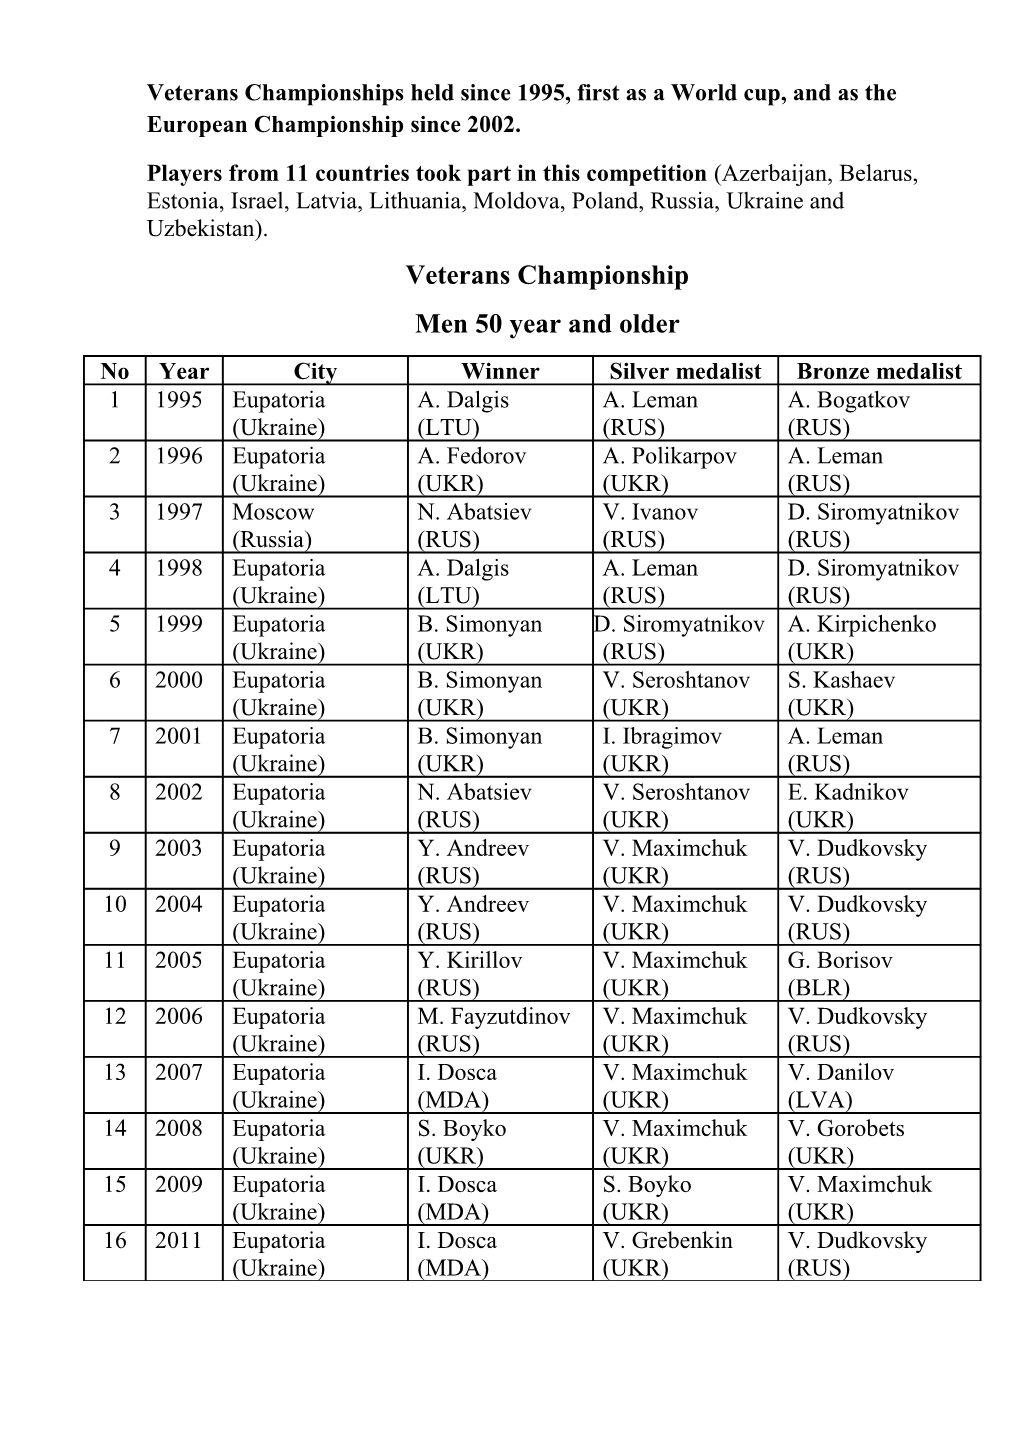 Veterans Championships Held Since 1995, First As a World Cup, and As the European Championship